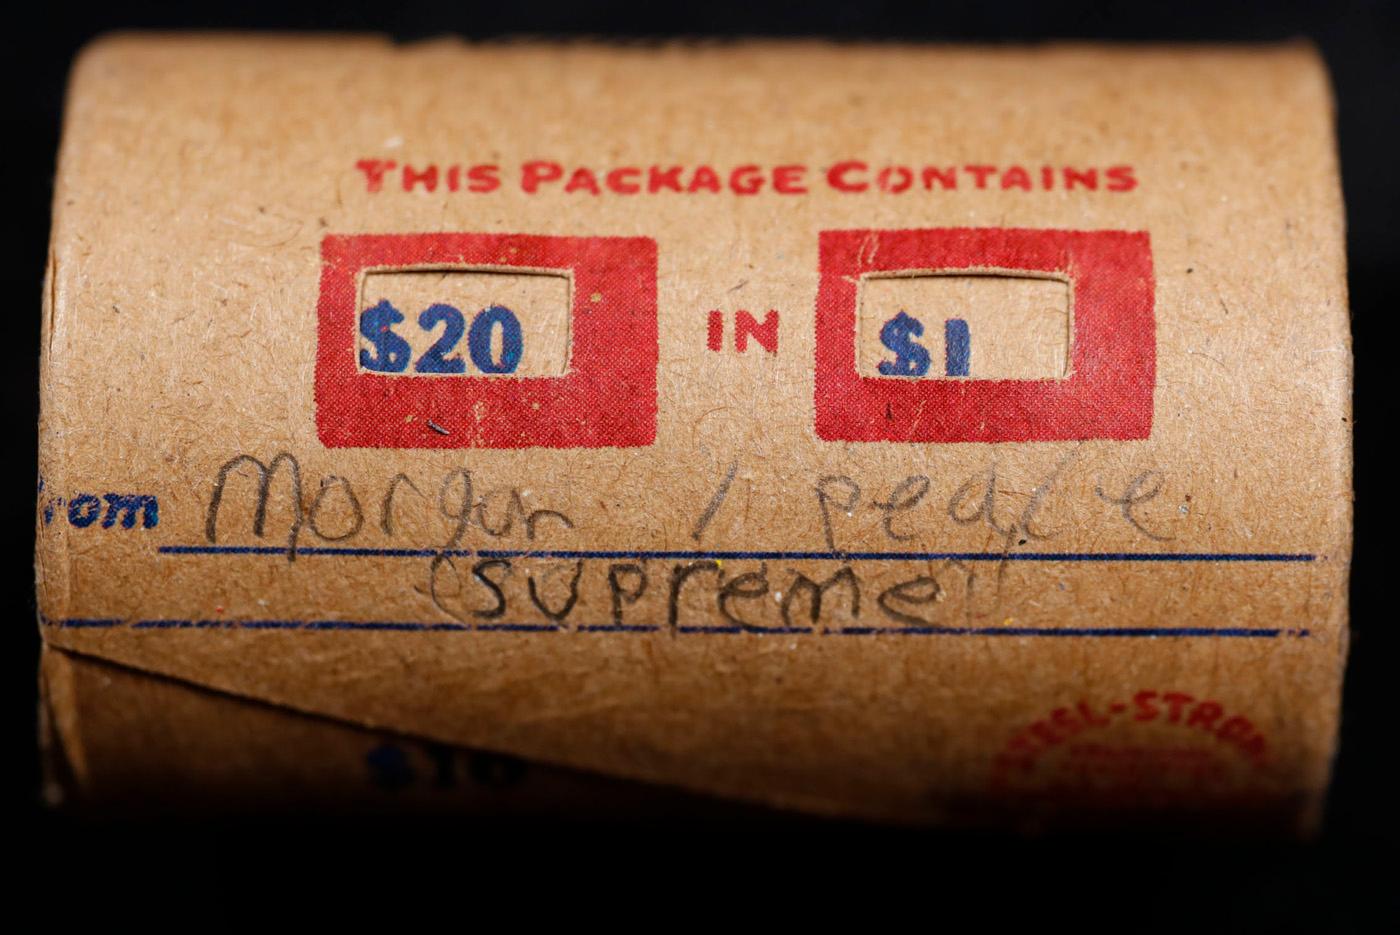 *EXCLUSIVE* x20 Morgan Covered End Roll! Marked "Morgan/Peace Supreme"! - Huge Vault Hoard  (FC)